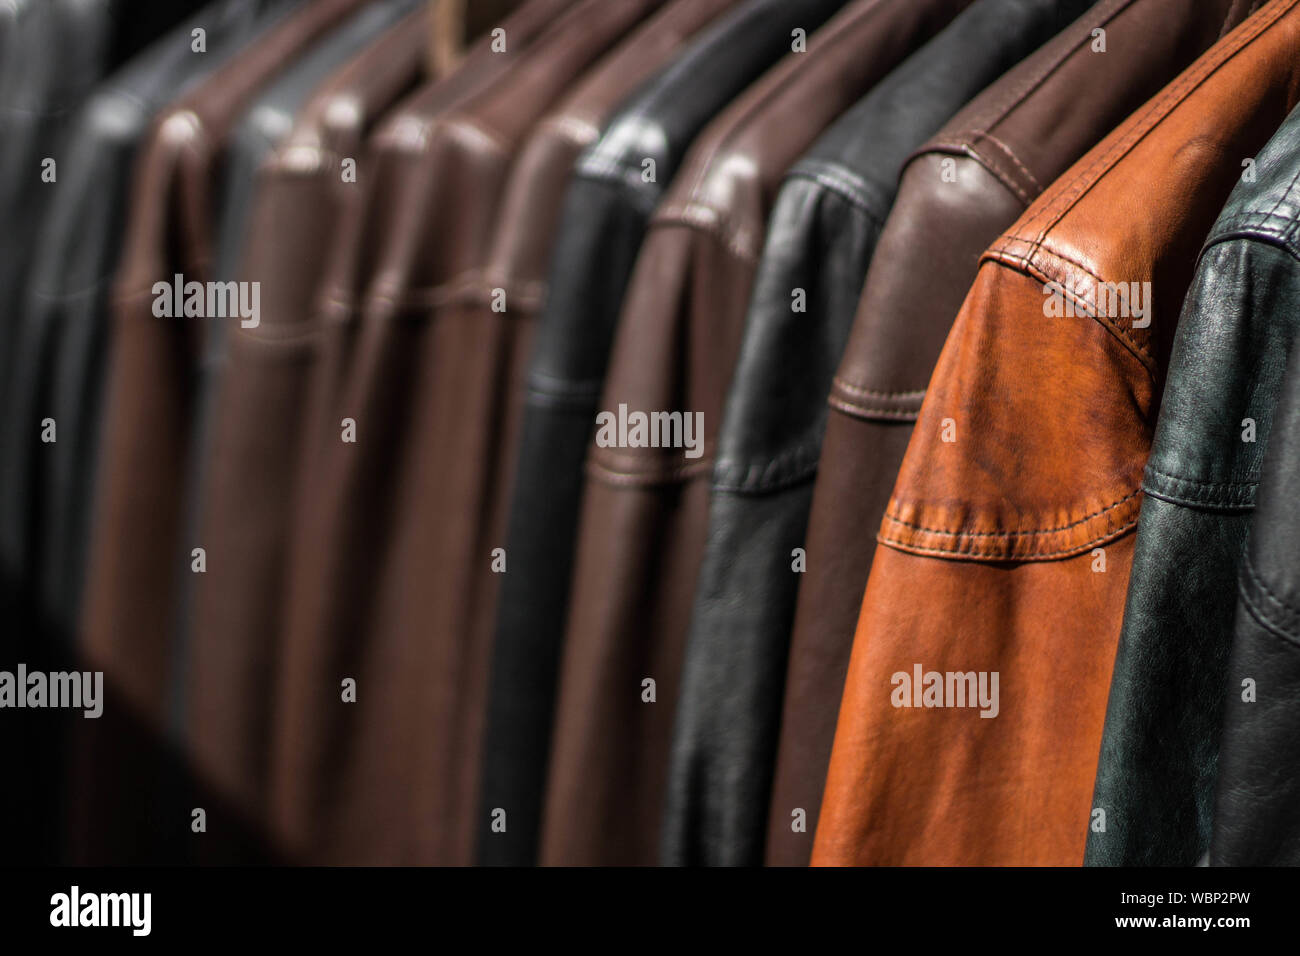 Full Frame Shot Of Leather Jackets For Sale In Clothing Store Stock Photo